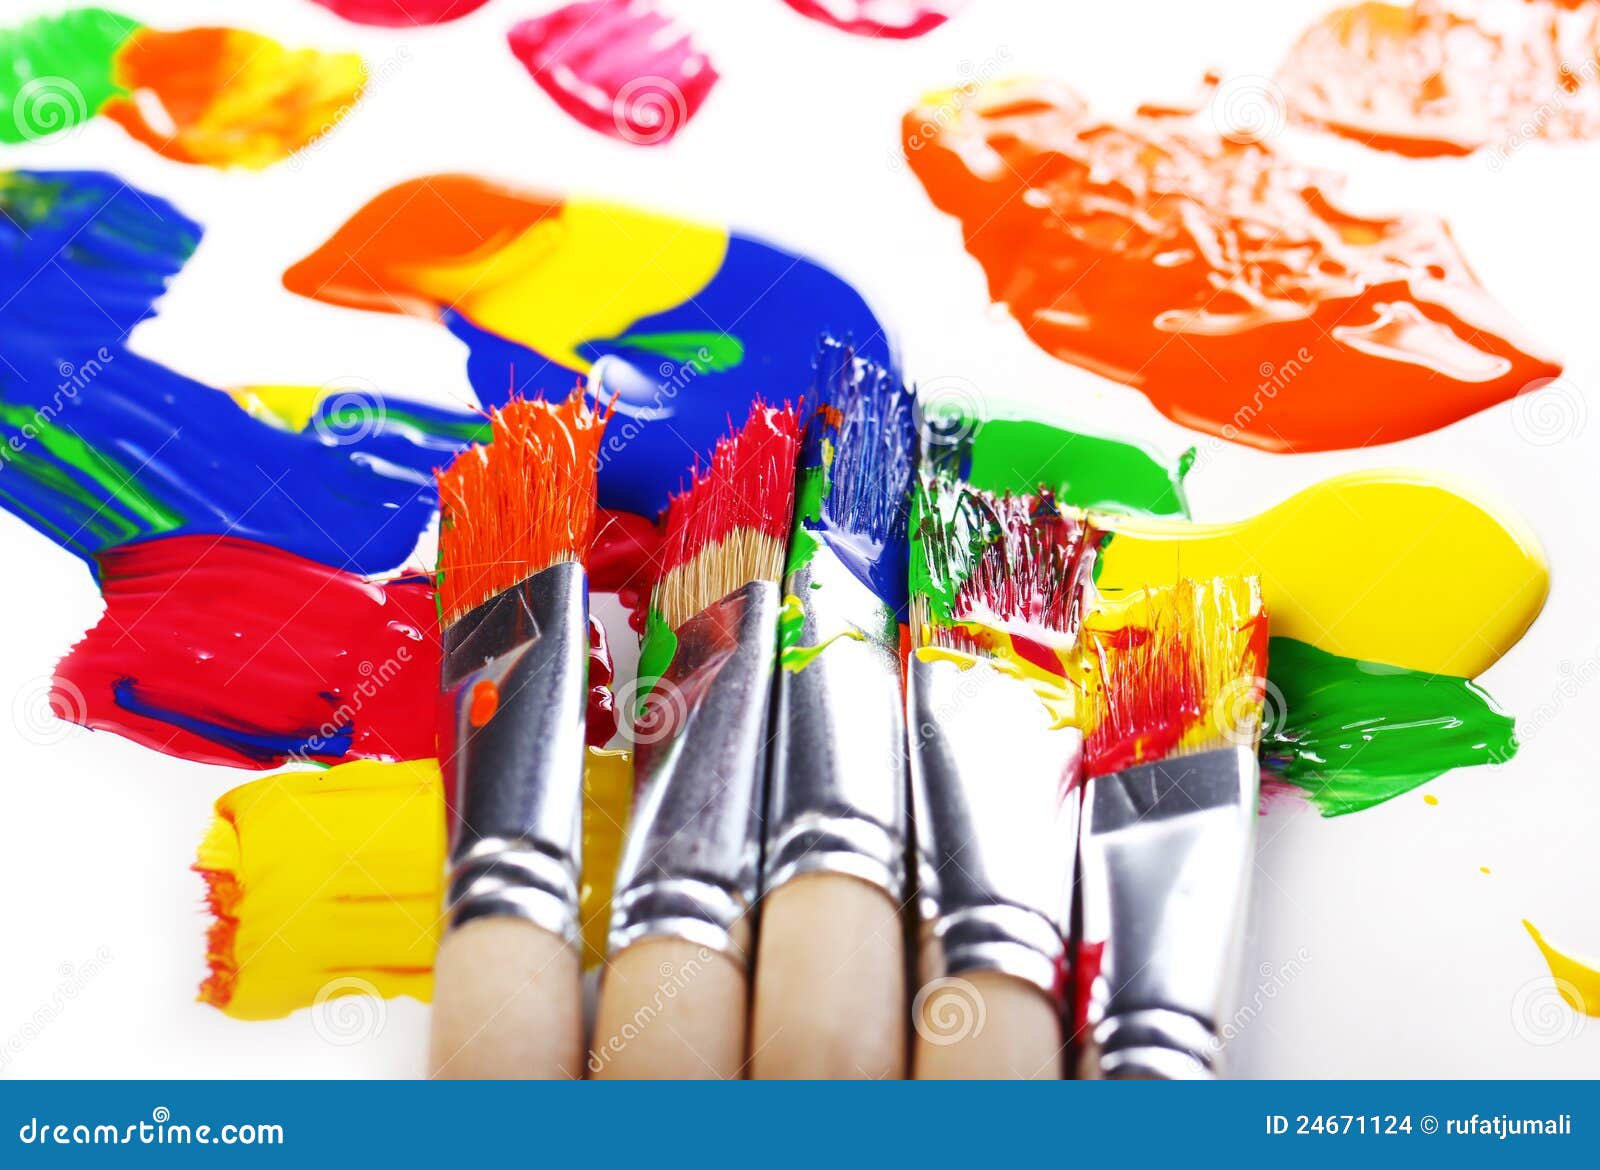 Colorful paint and brushes stock photo. Image of colorful - 24671124